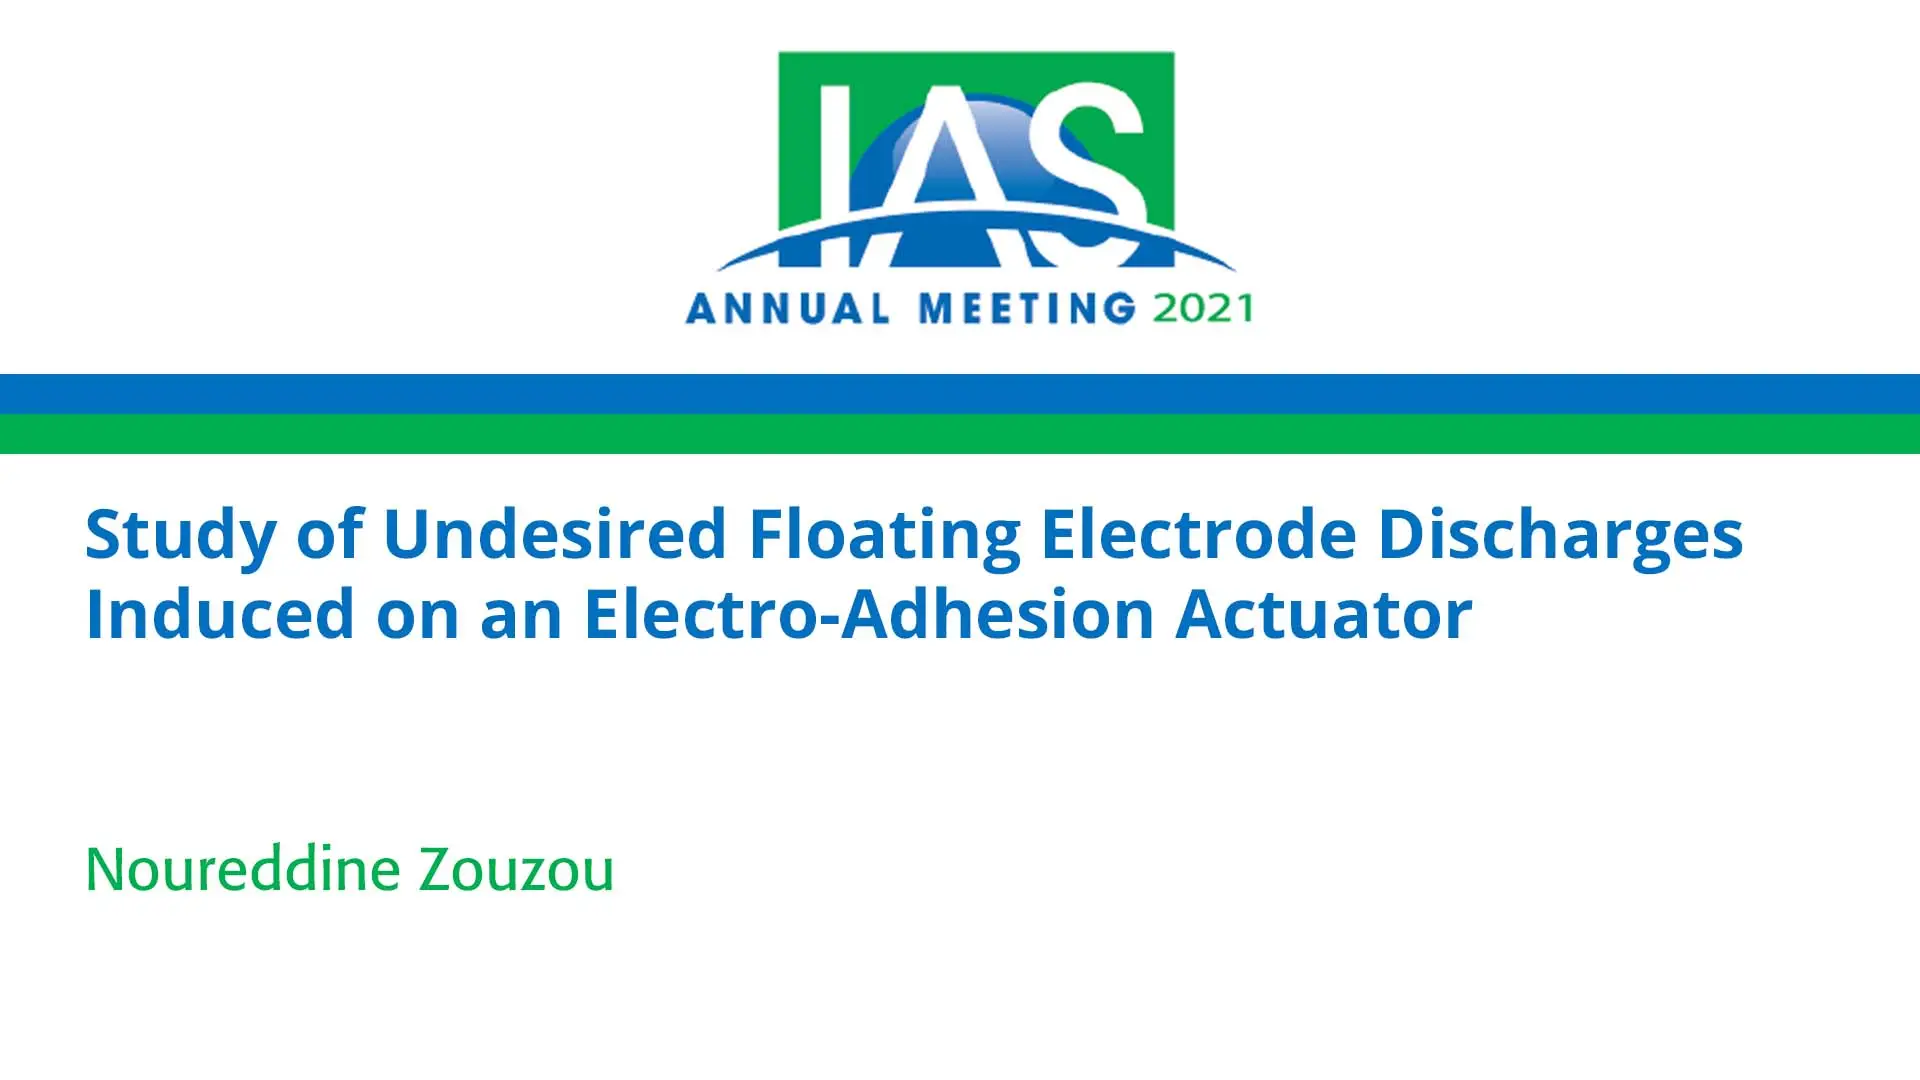 Study of Undesired Floating Electrode Discharges Induced on an Electro-Adhesion Actuator